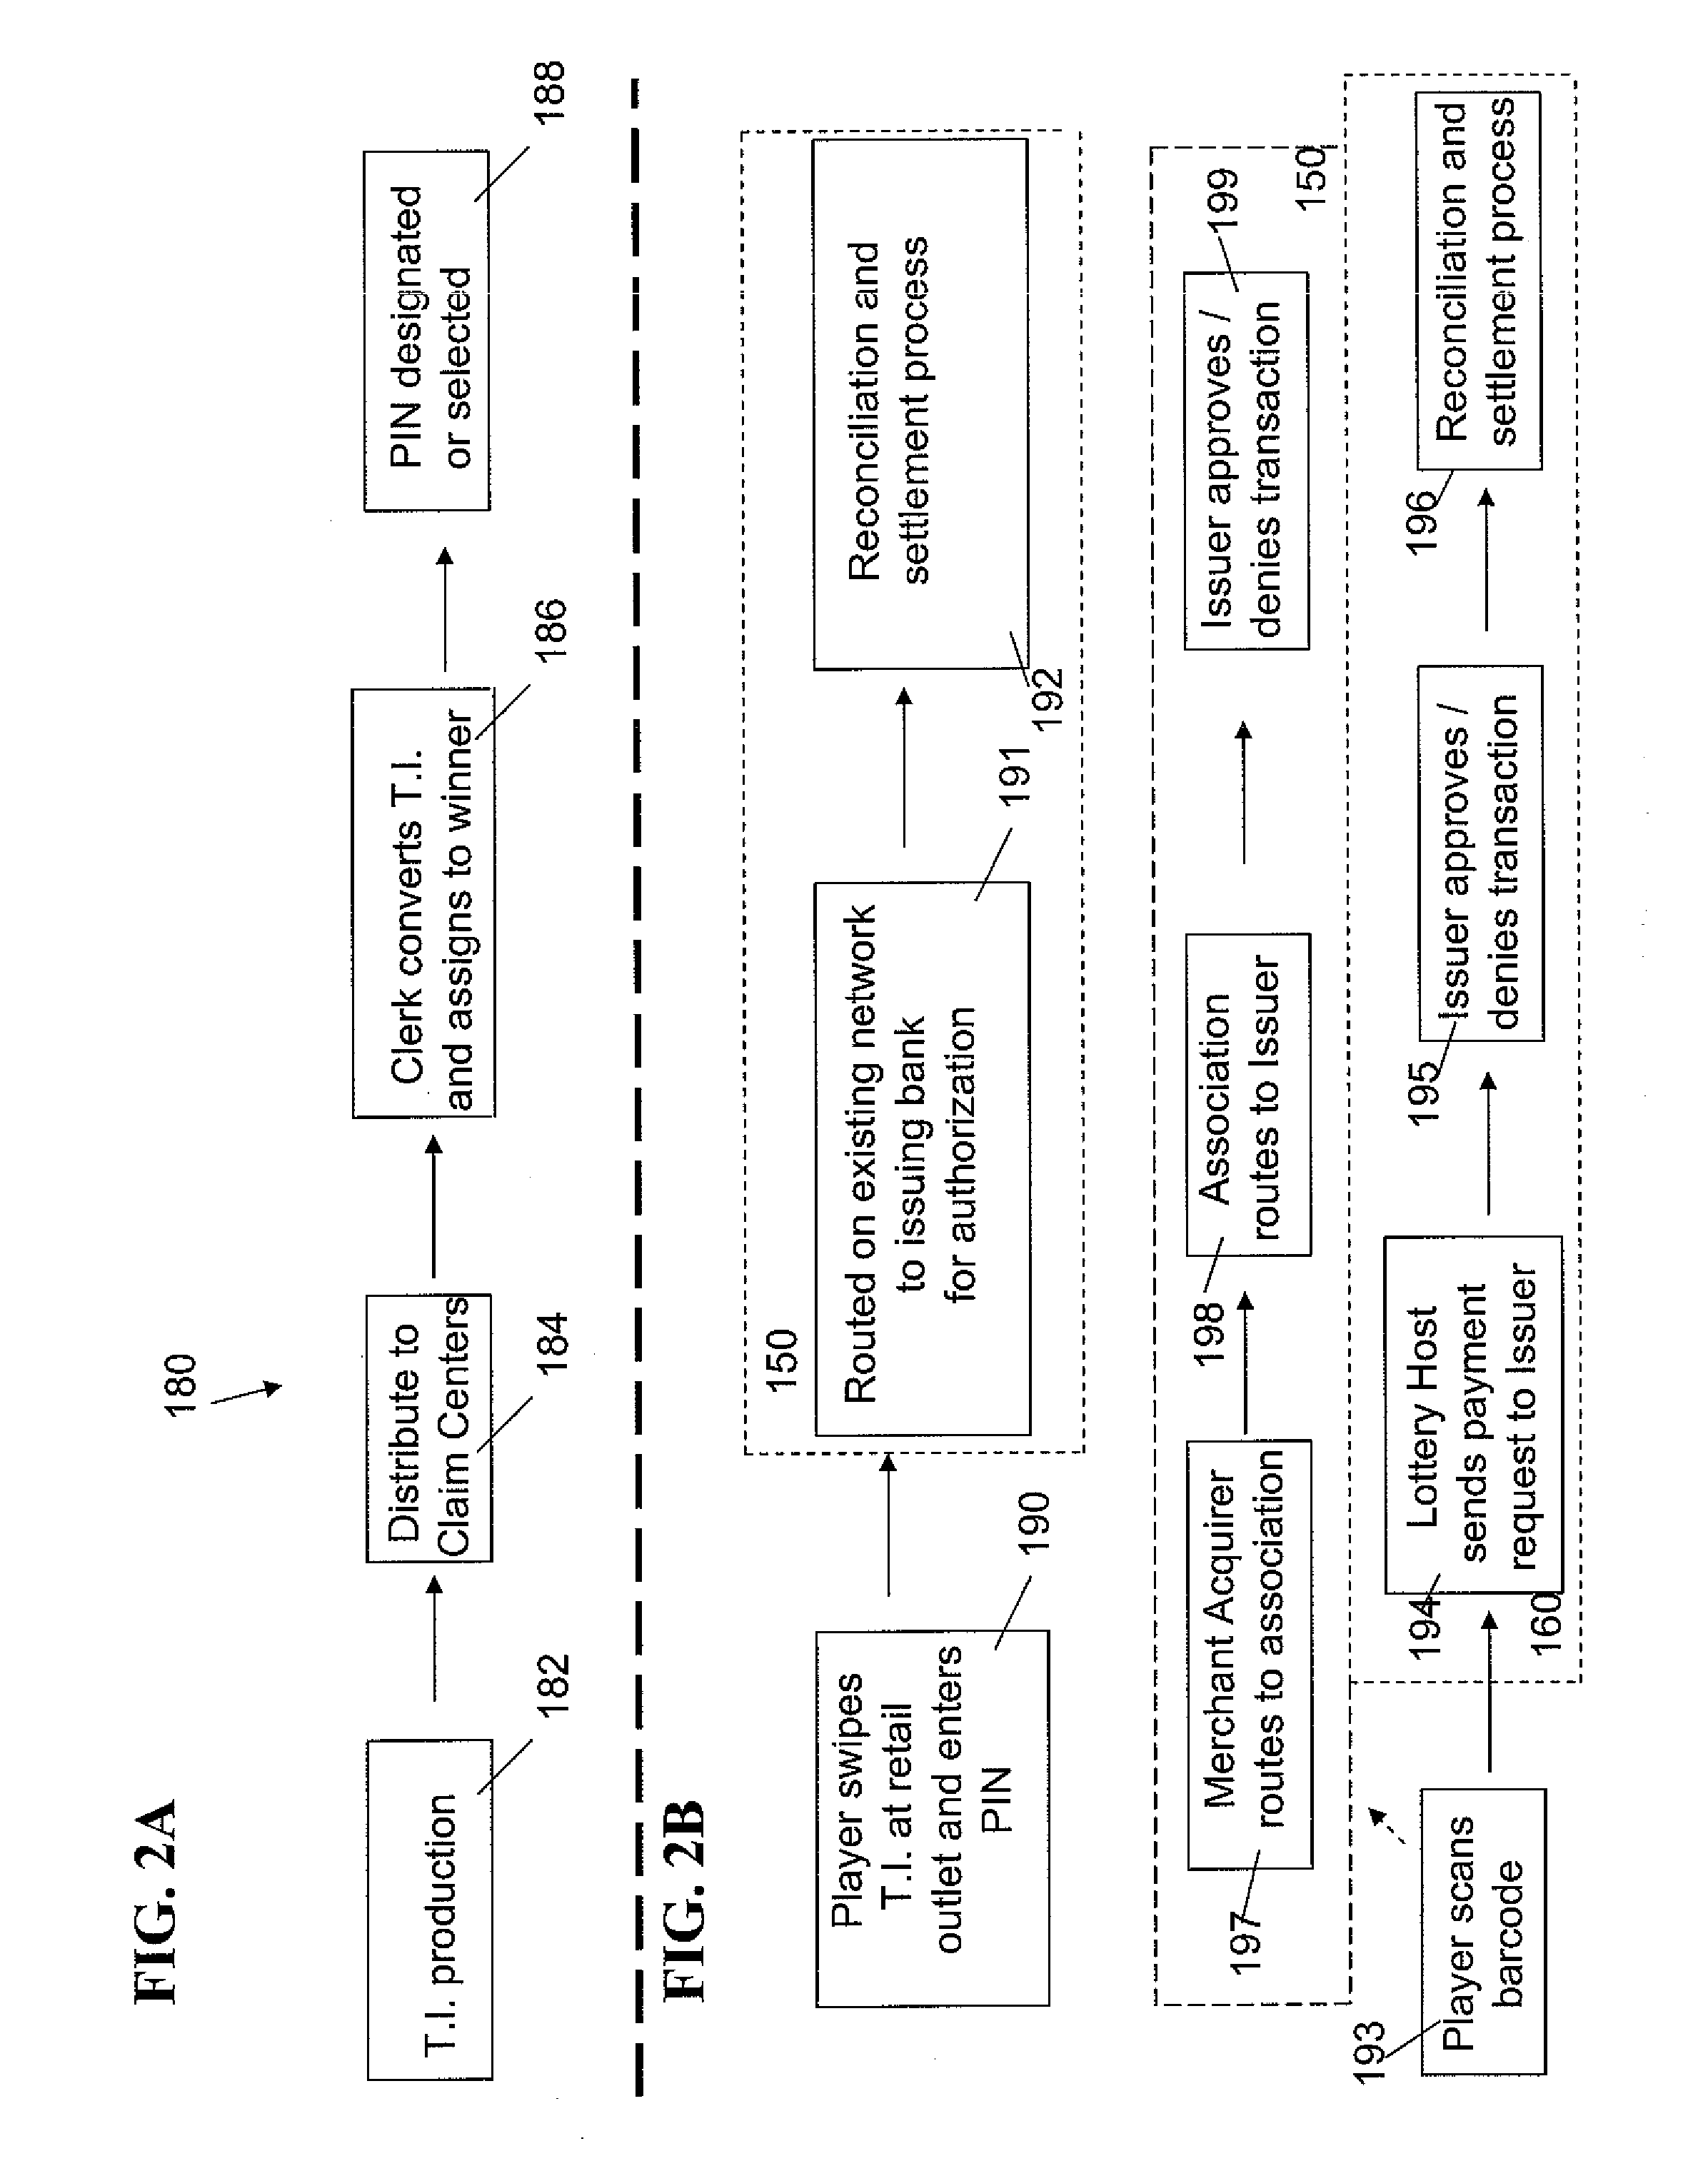 Lottery Transaction Device, System and Method with Paperless Wagering and Payment of Winnings